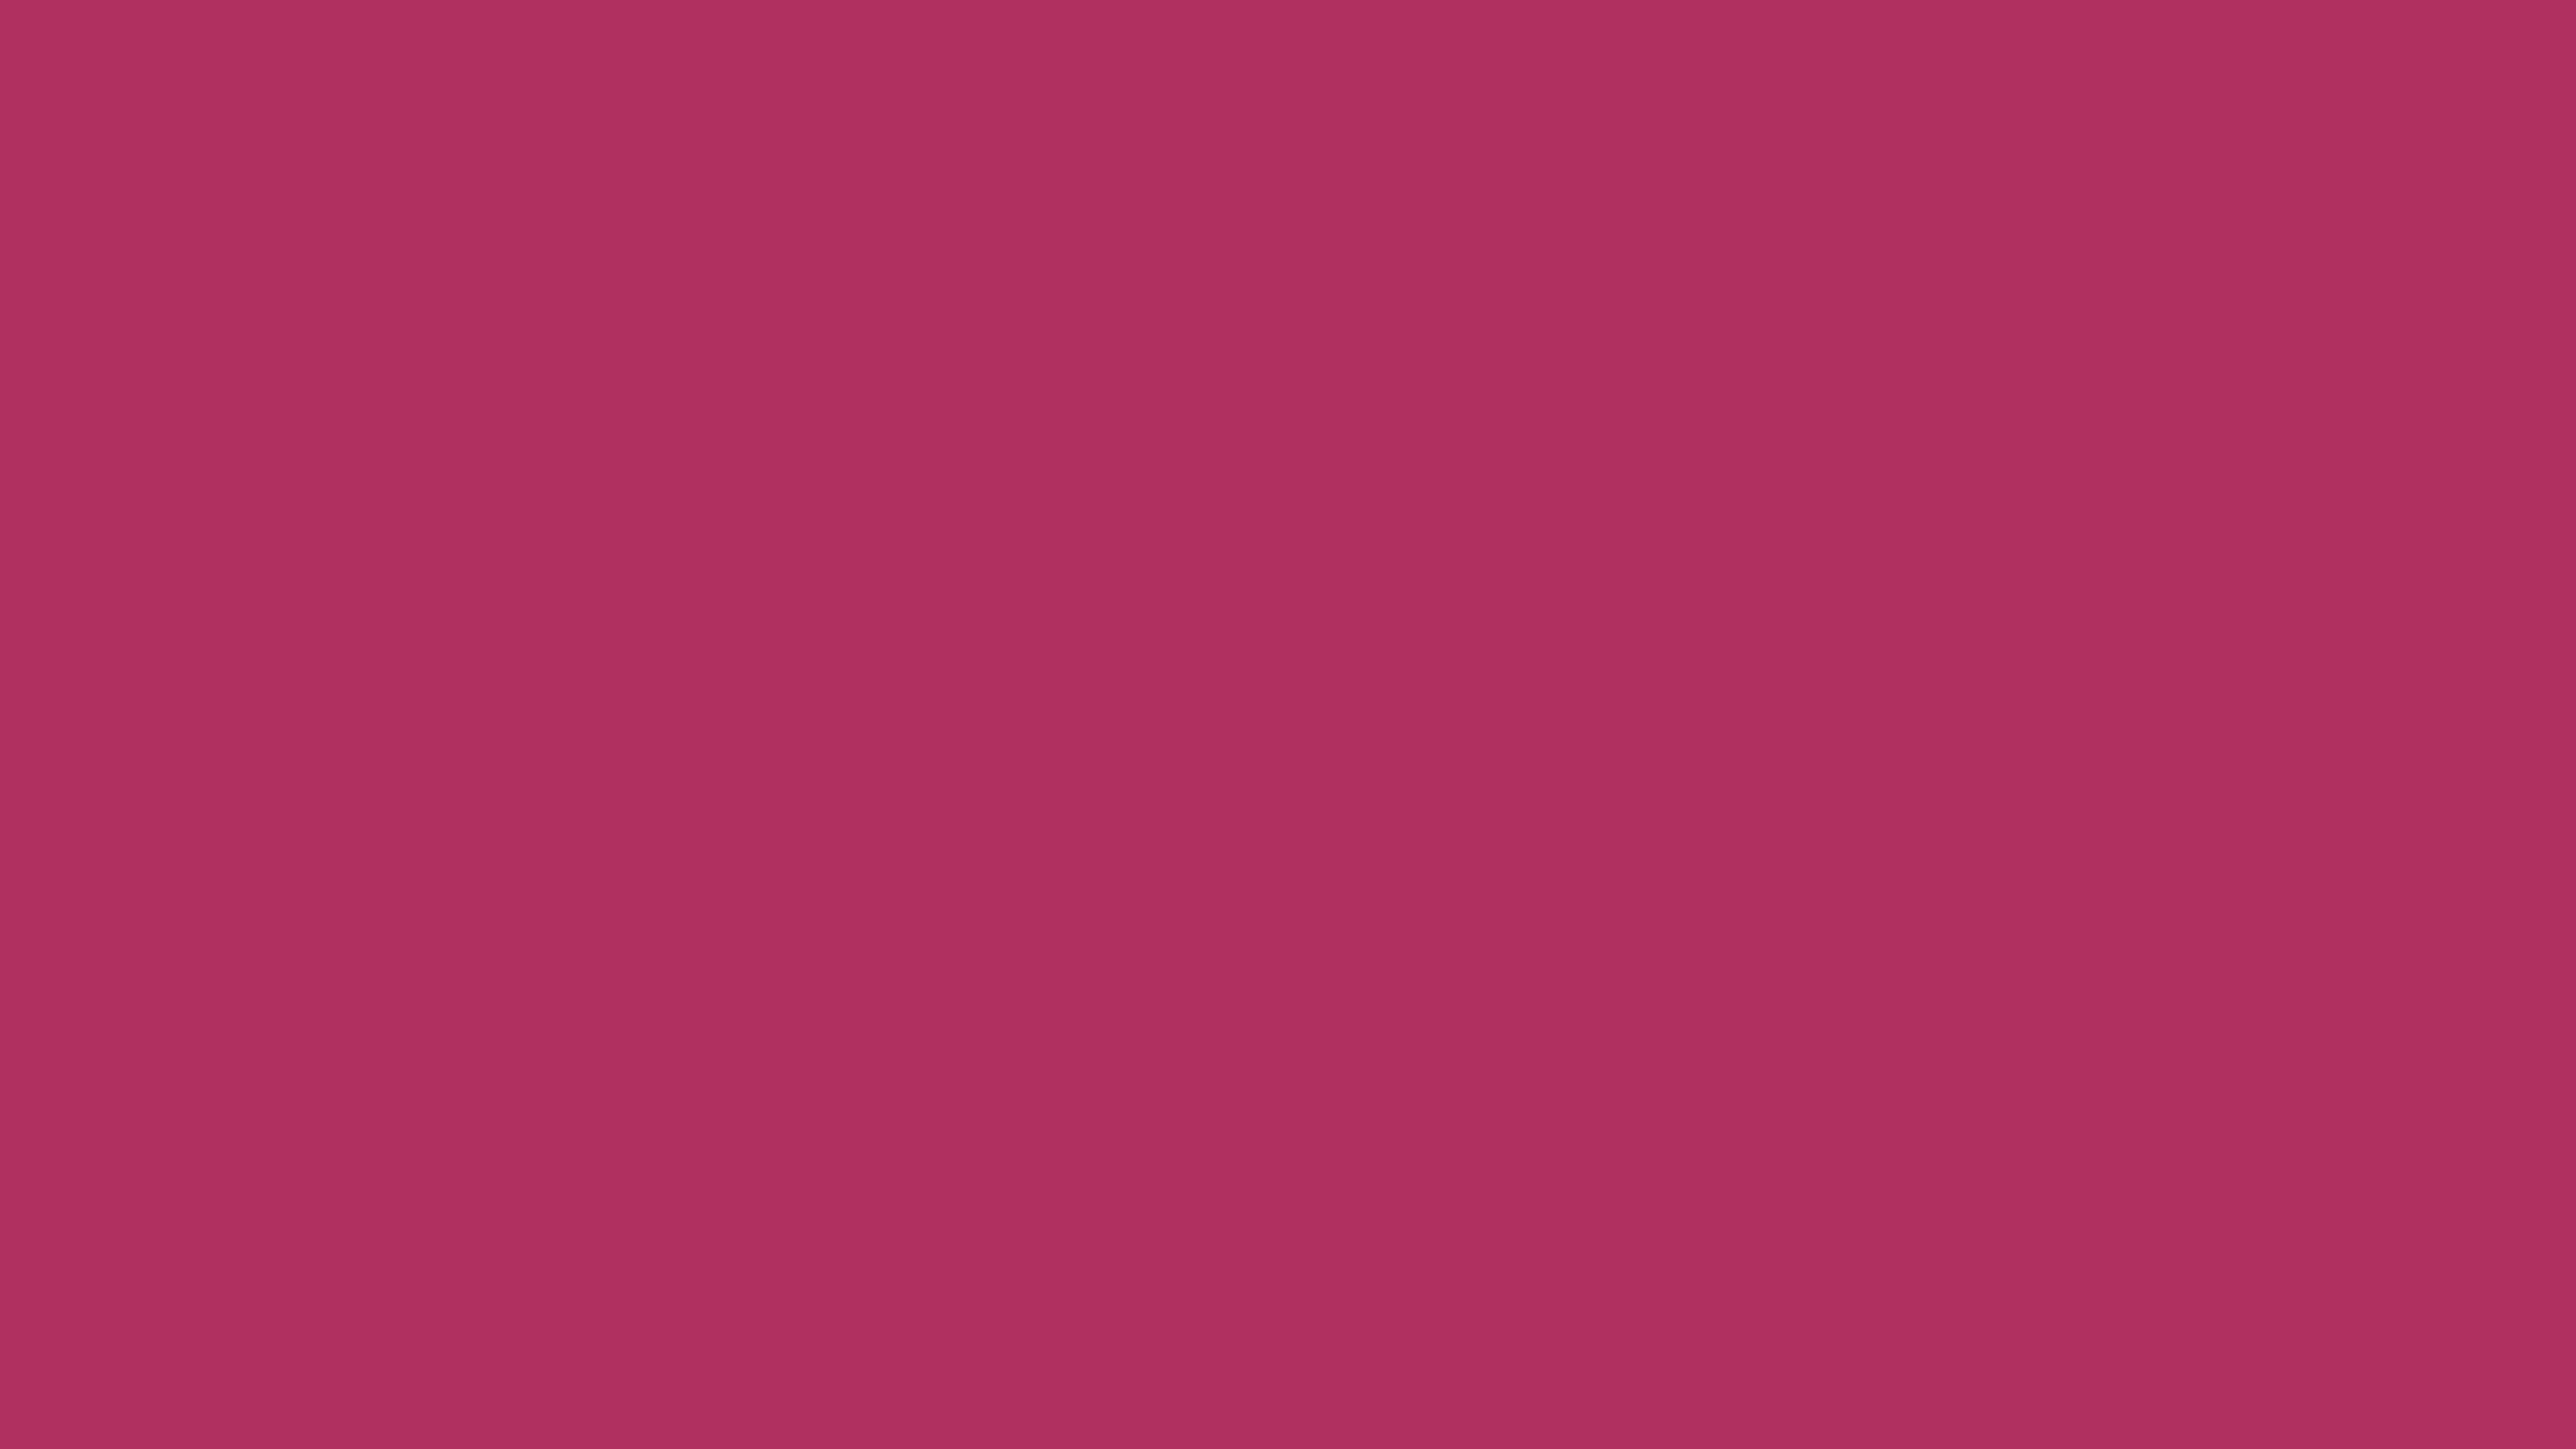 4096x2304 Rich Maroon Solid Color Background